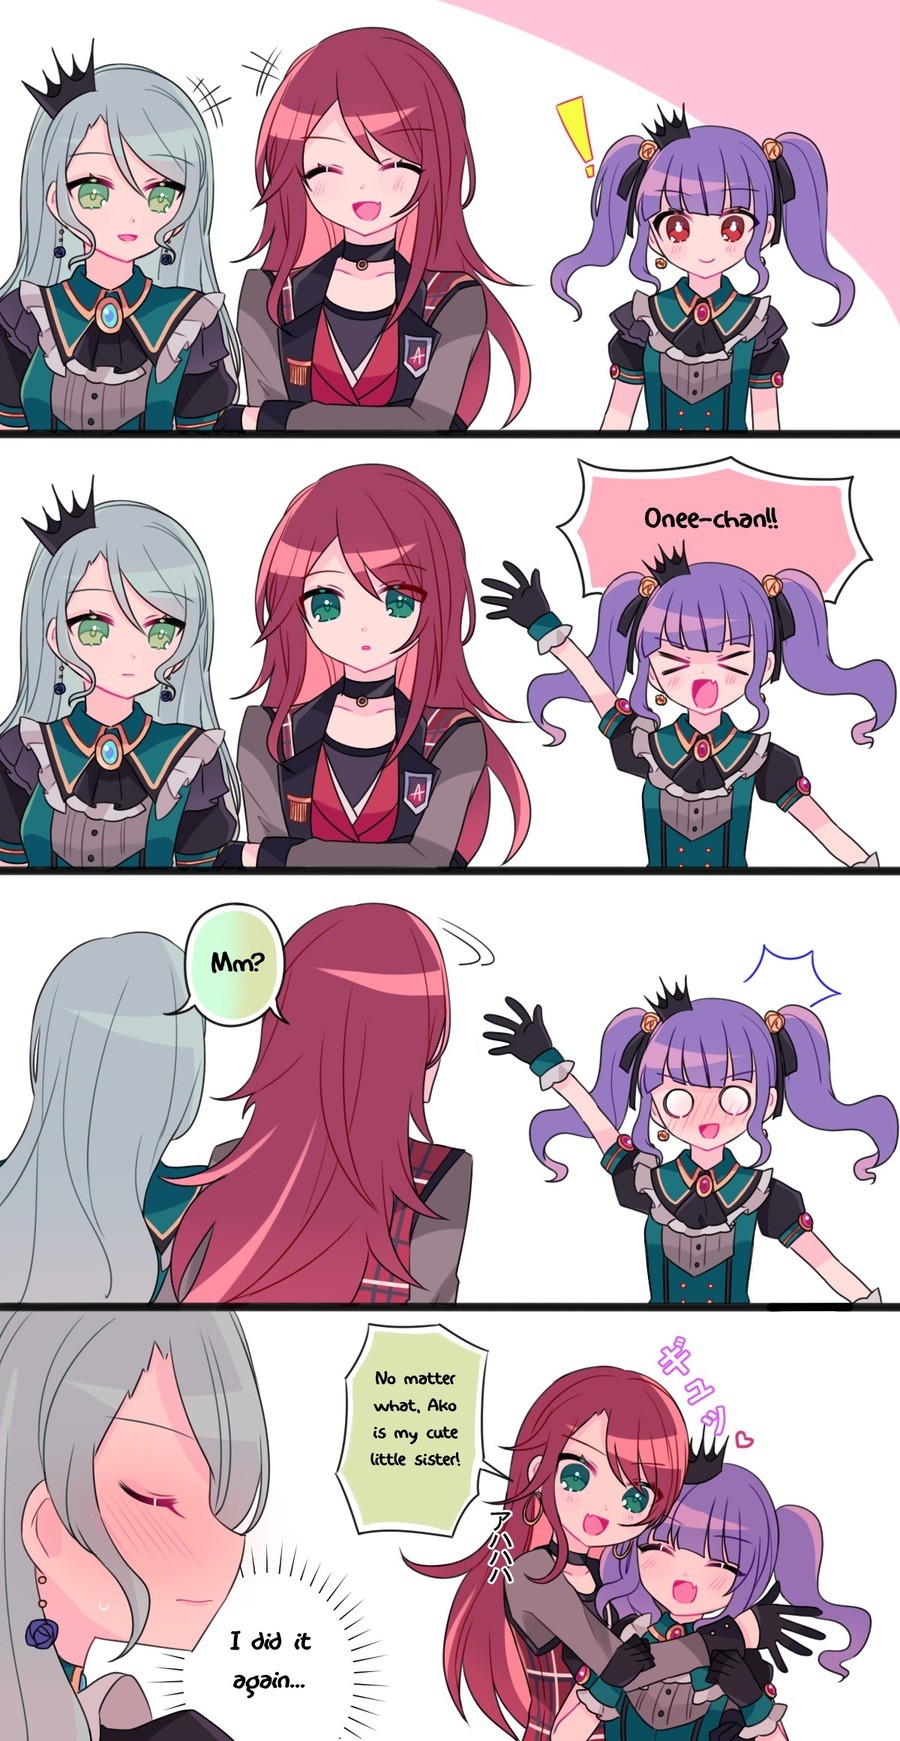 Daily BanG Dream #521. Artist's Twitter post: Found translated here: Girls are from BanG Dream join list: BanGDream (95 subs)Mention History &quot;お姉さんまんが②&quot